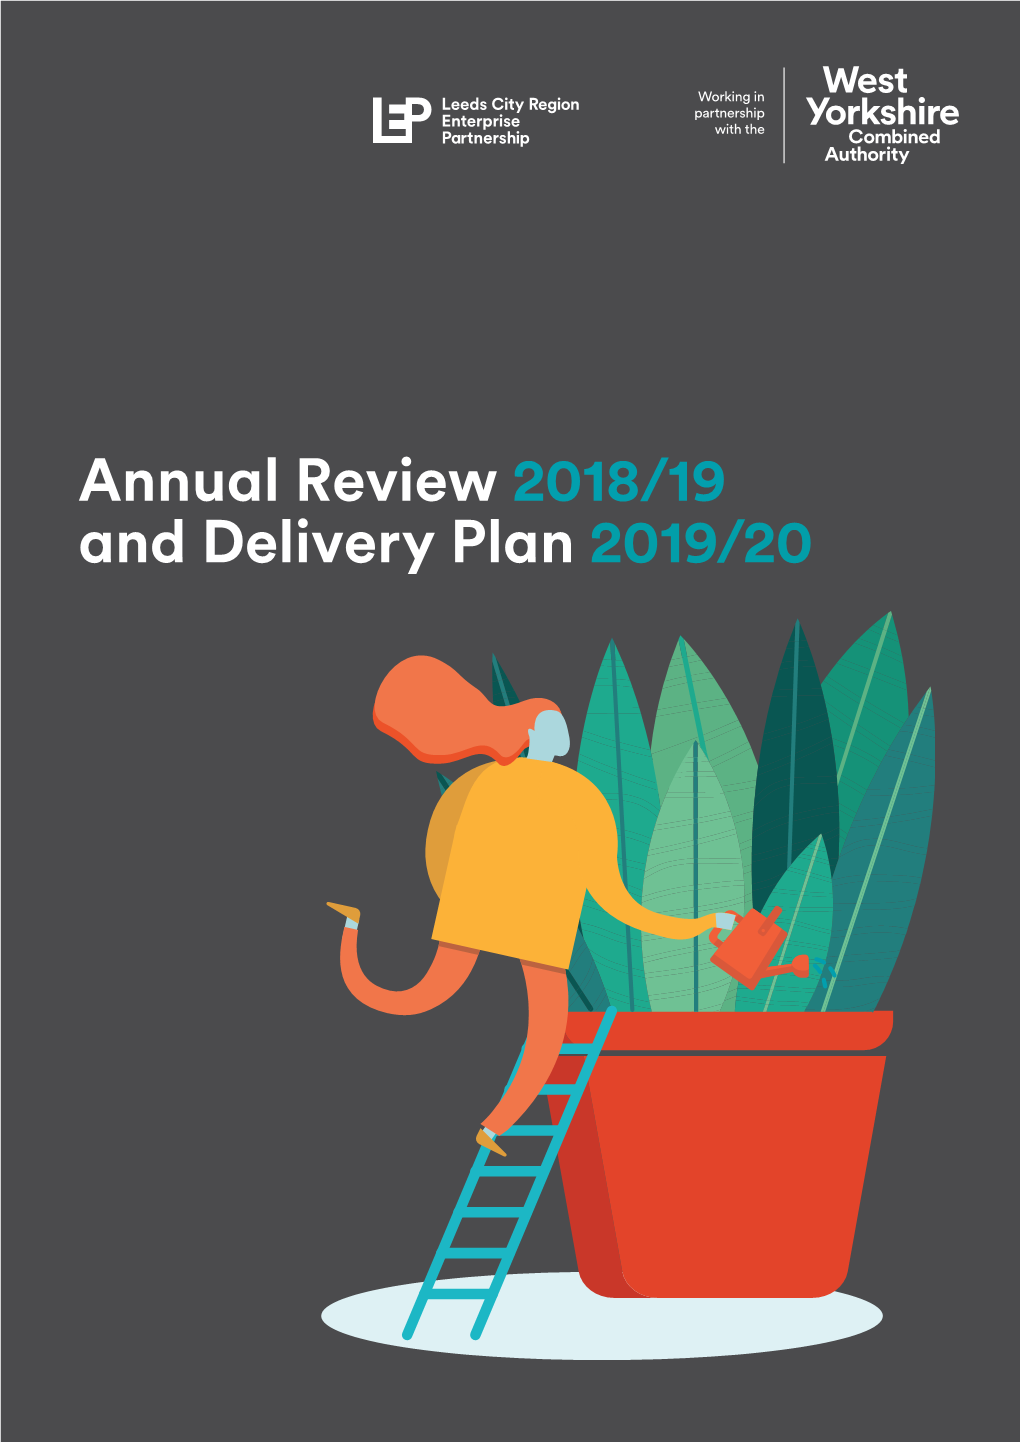 Annual Review 2018/19 and Delivery Plan 2019/20